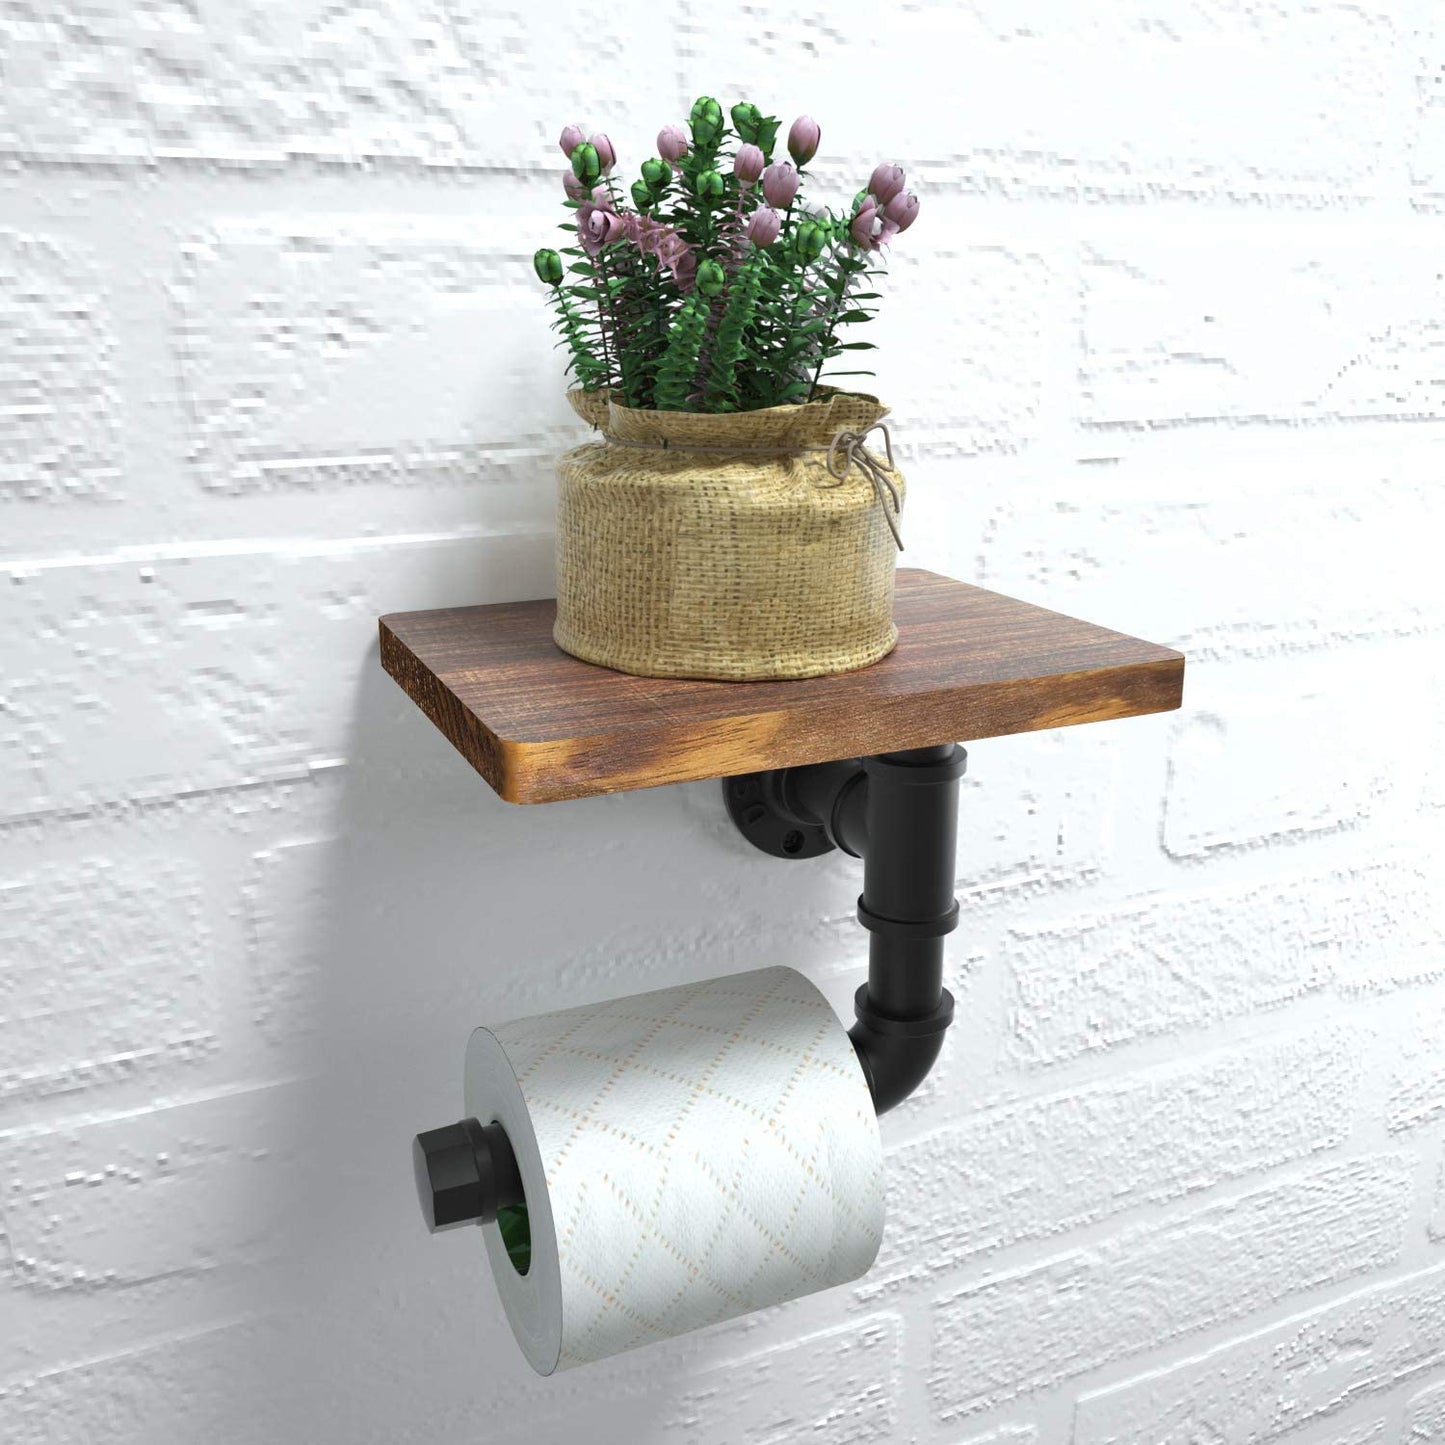 Industrial Toilet Roll Holder with Shelf, Wall Mounted Toilet Paper Holder, Vintage Bathroom Accessories, Rustic Home Décor